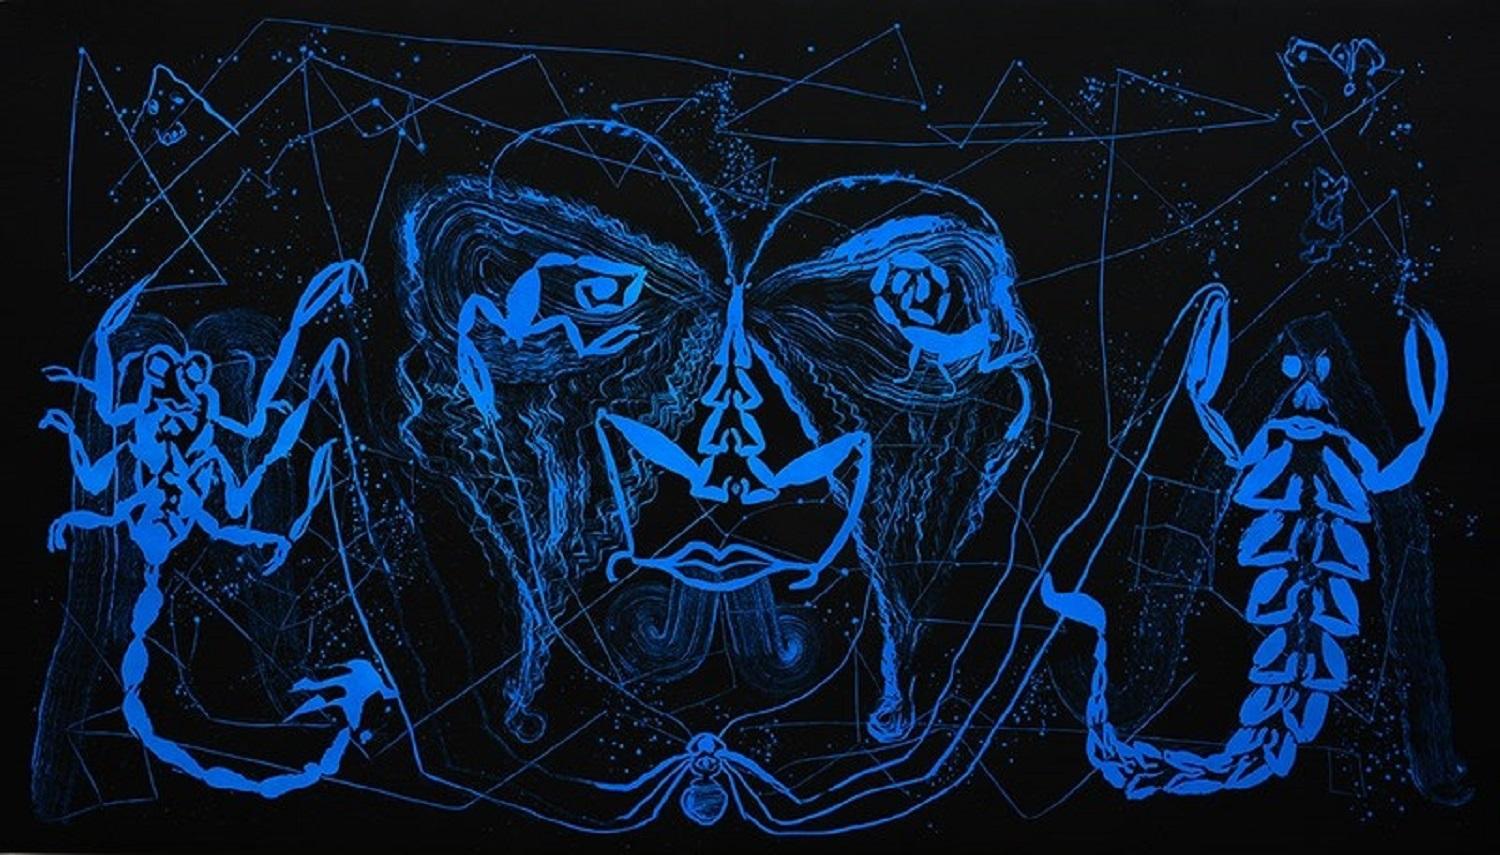 Sergio Hernández (Mexico, 1957)
'Alacranes Azules', 2016
woodcut on paper
46.9 x 82.7 in. (119 x 210 cm.)
Edition of 30
Unframed
























